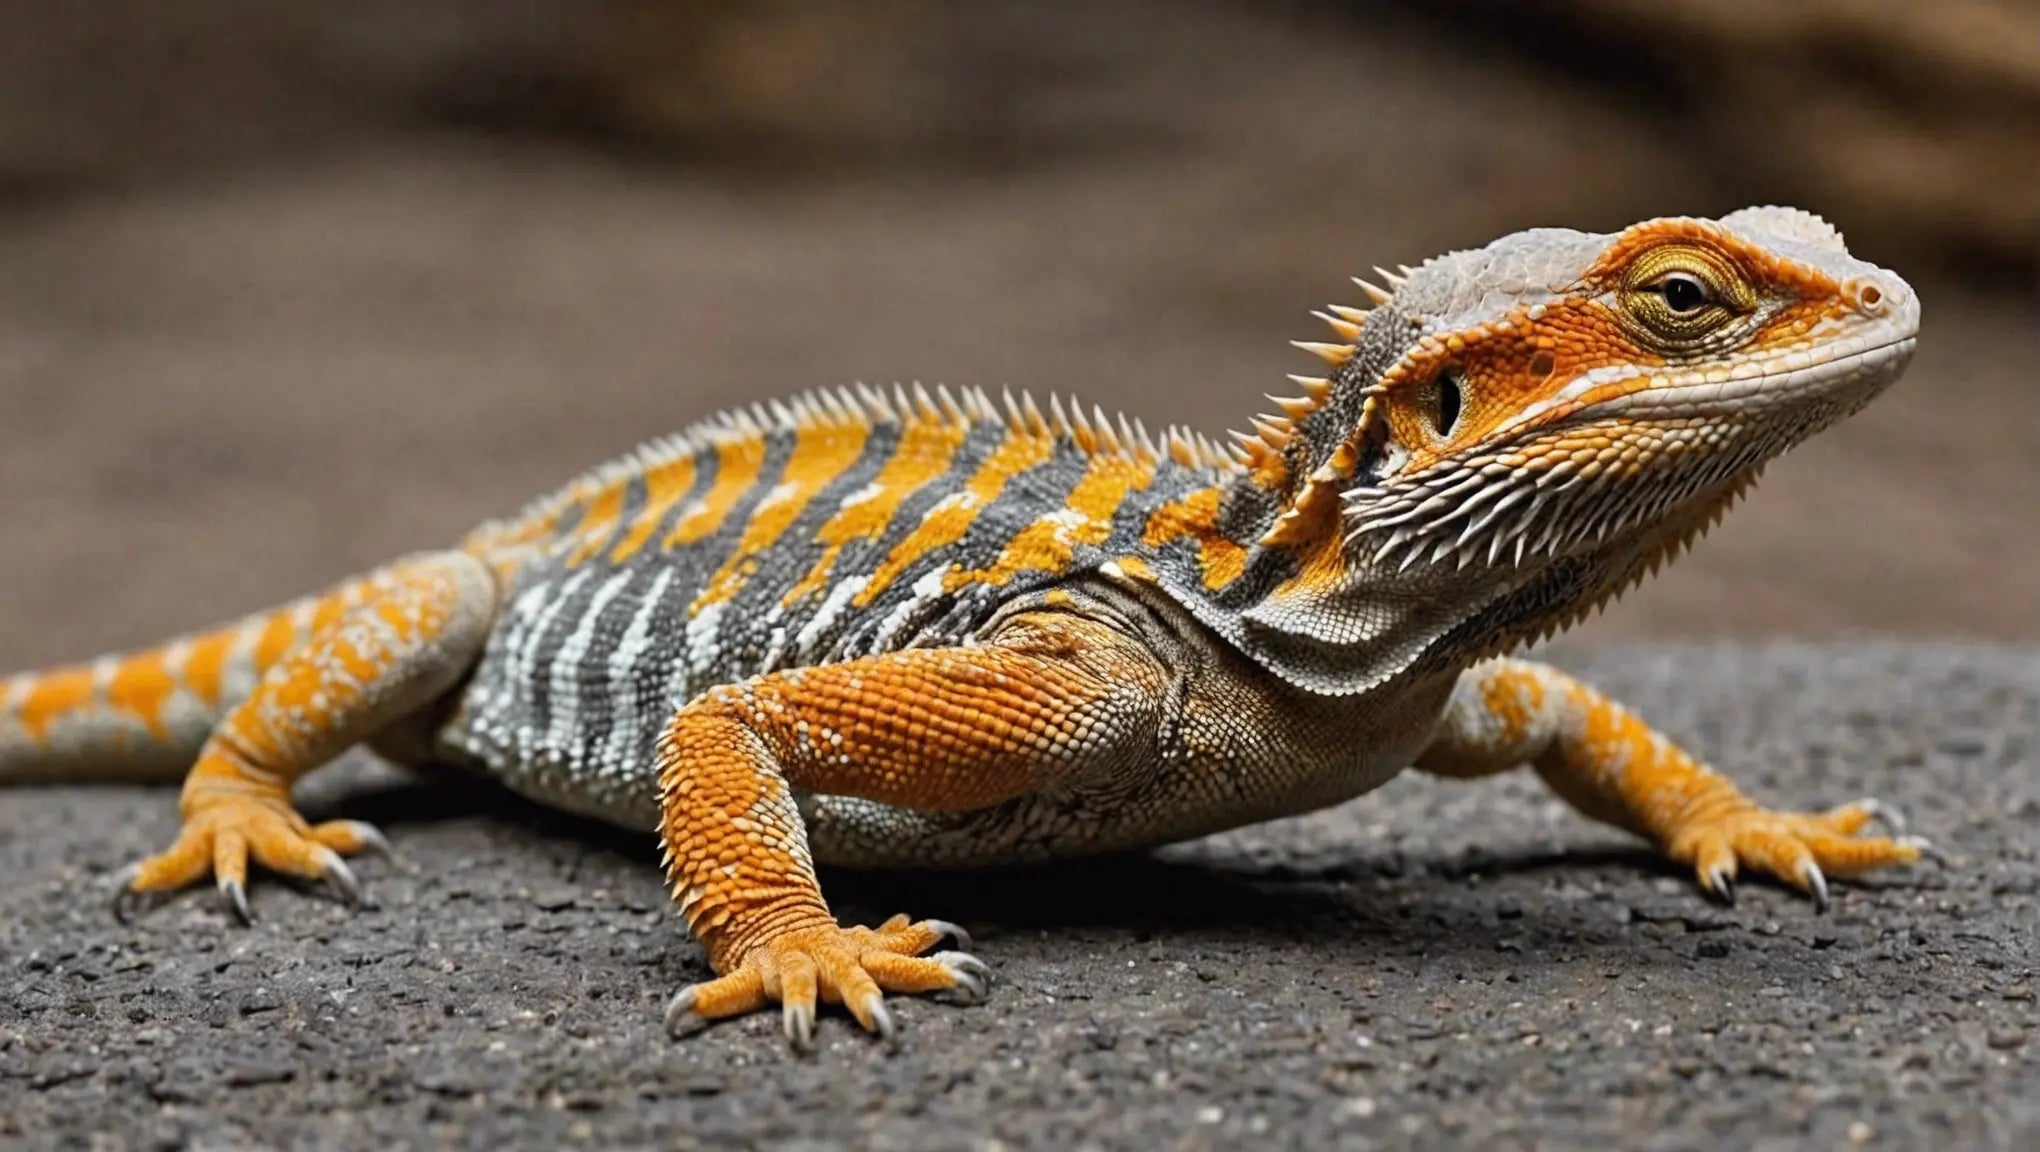 10 Fascinating Bearded Dragon Facts You Need to Know